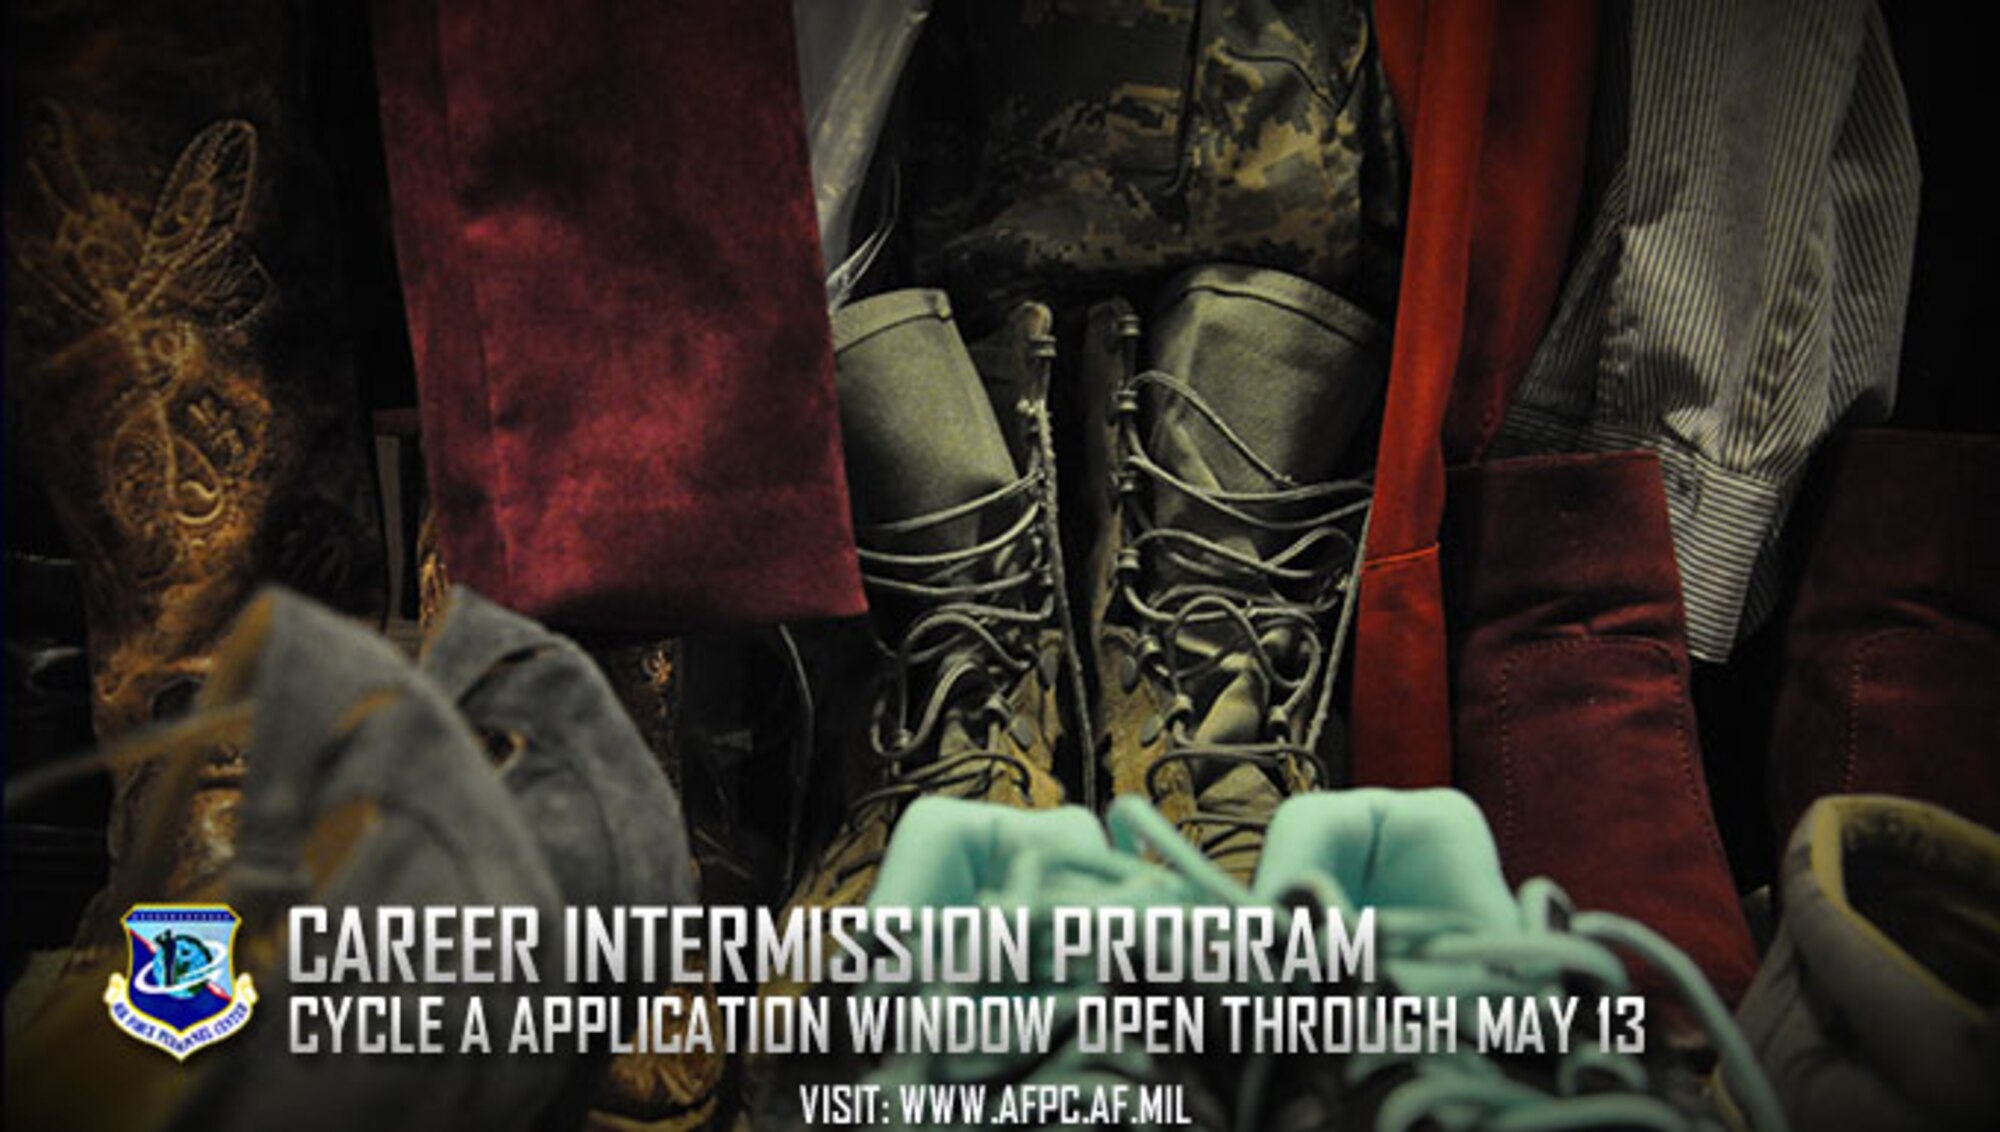 Career Intermission Program; Cycle A application window open through May 13